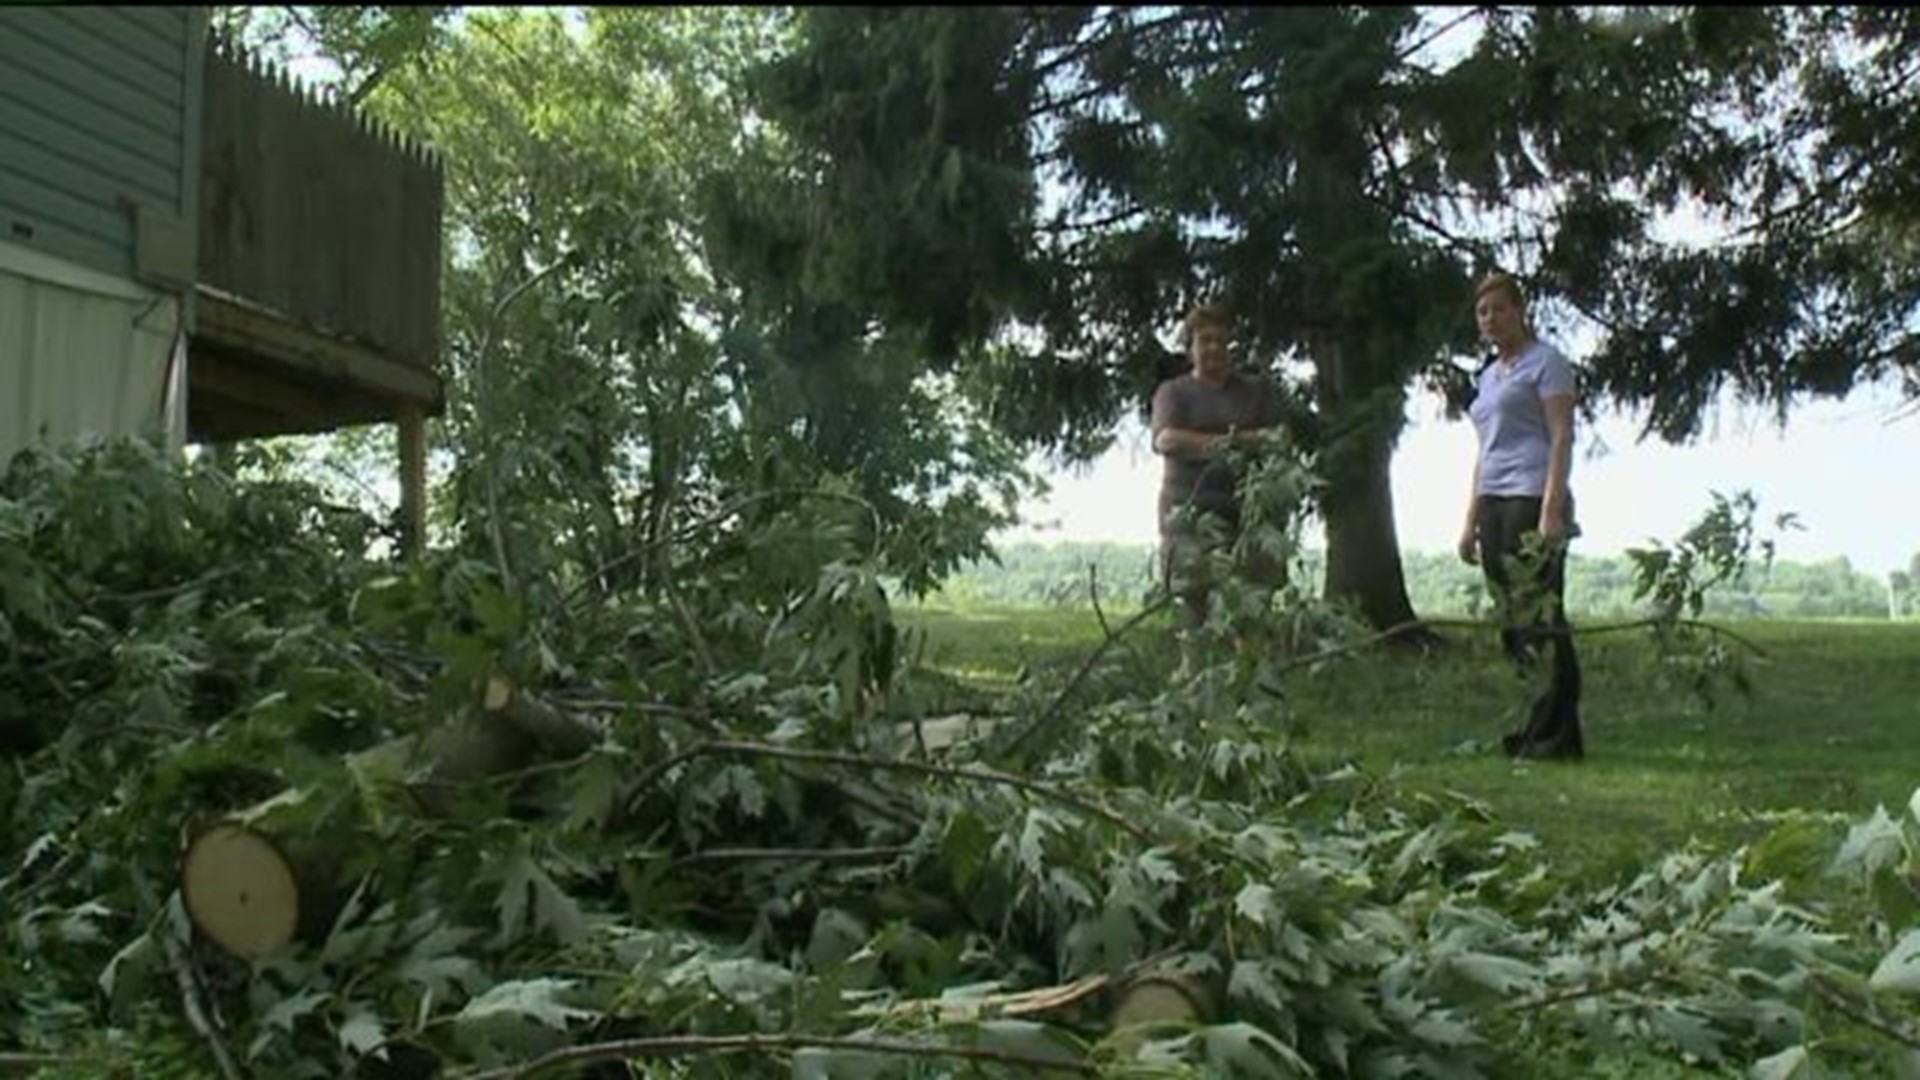 Storm Damage and a Close Call in Columbia County